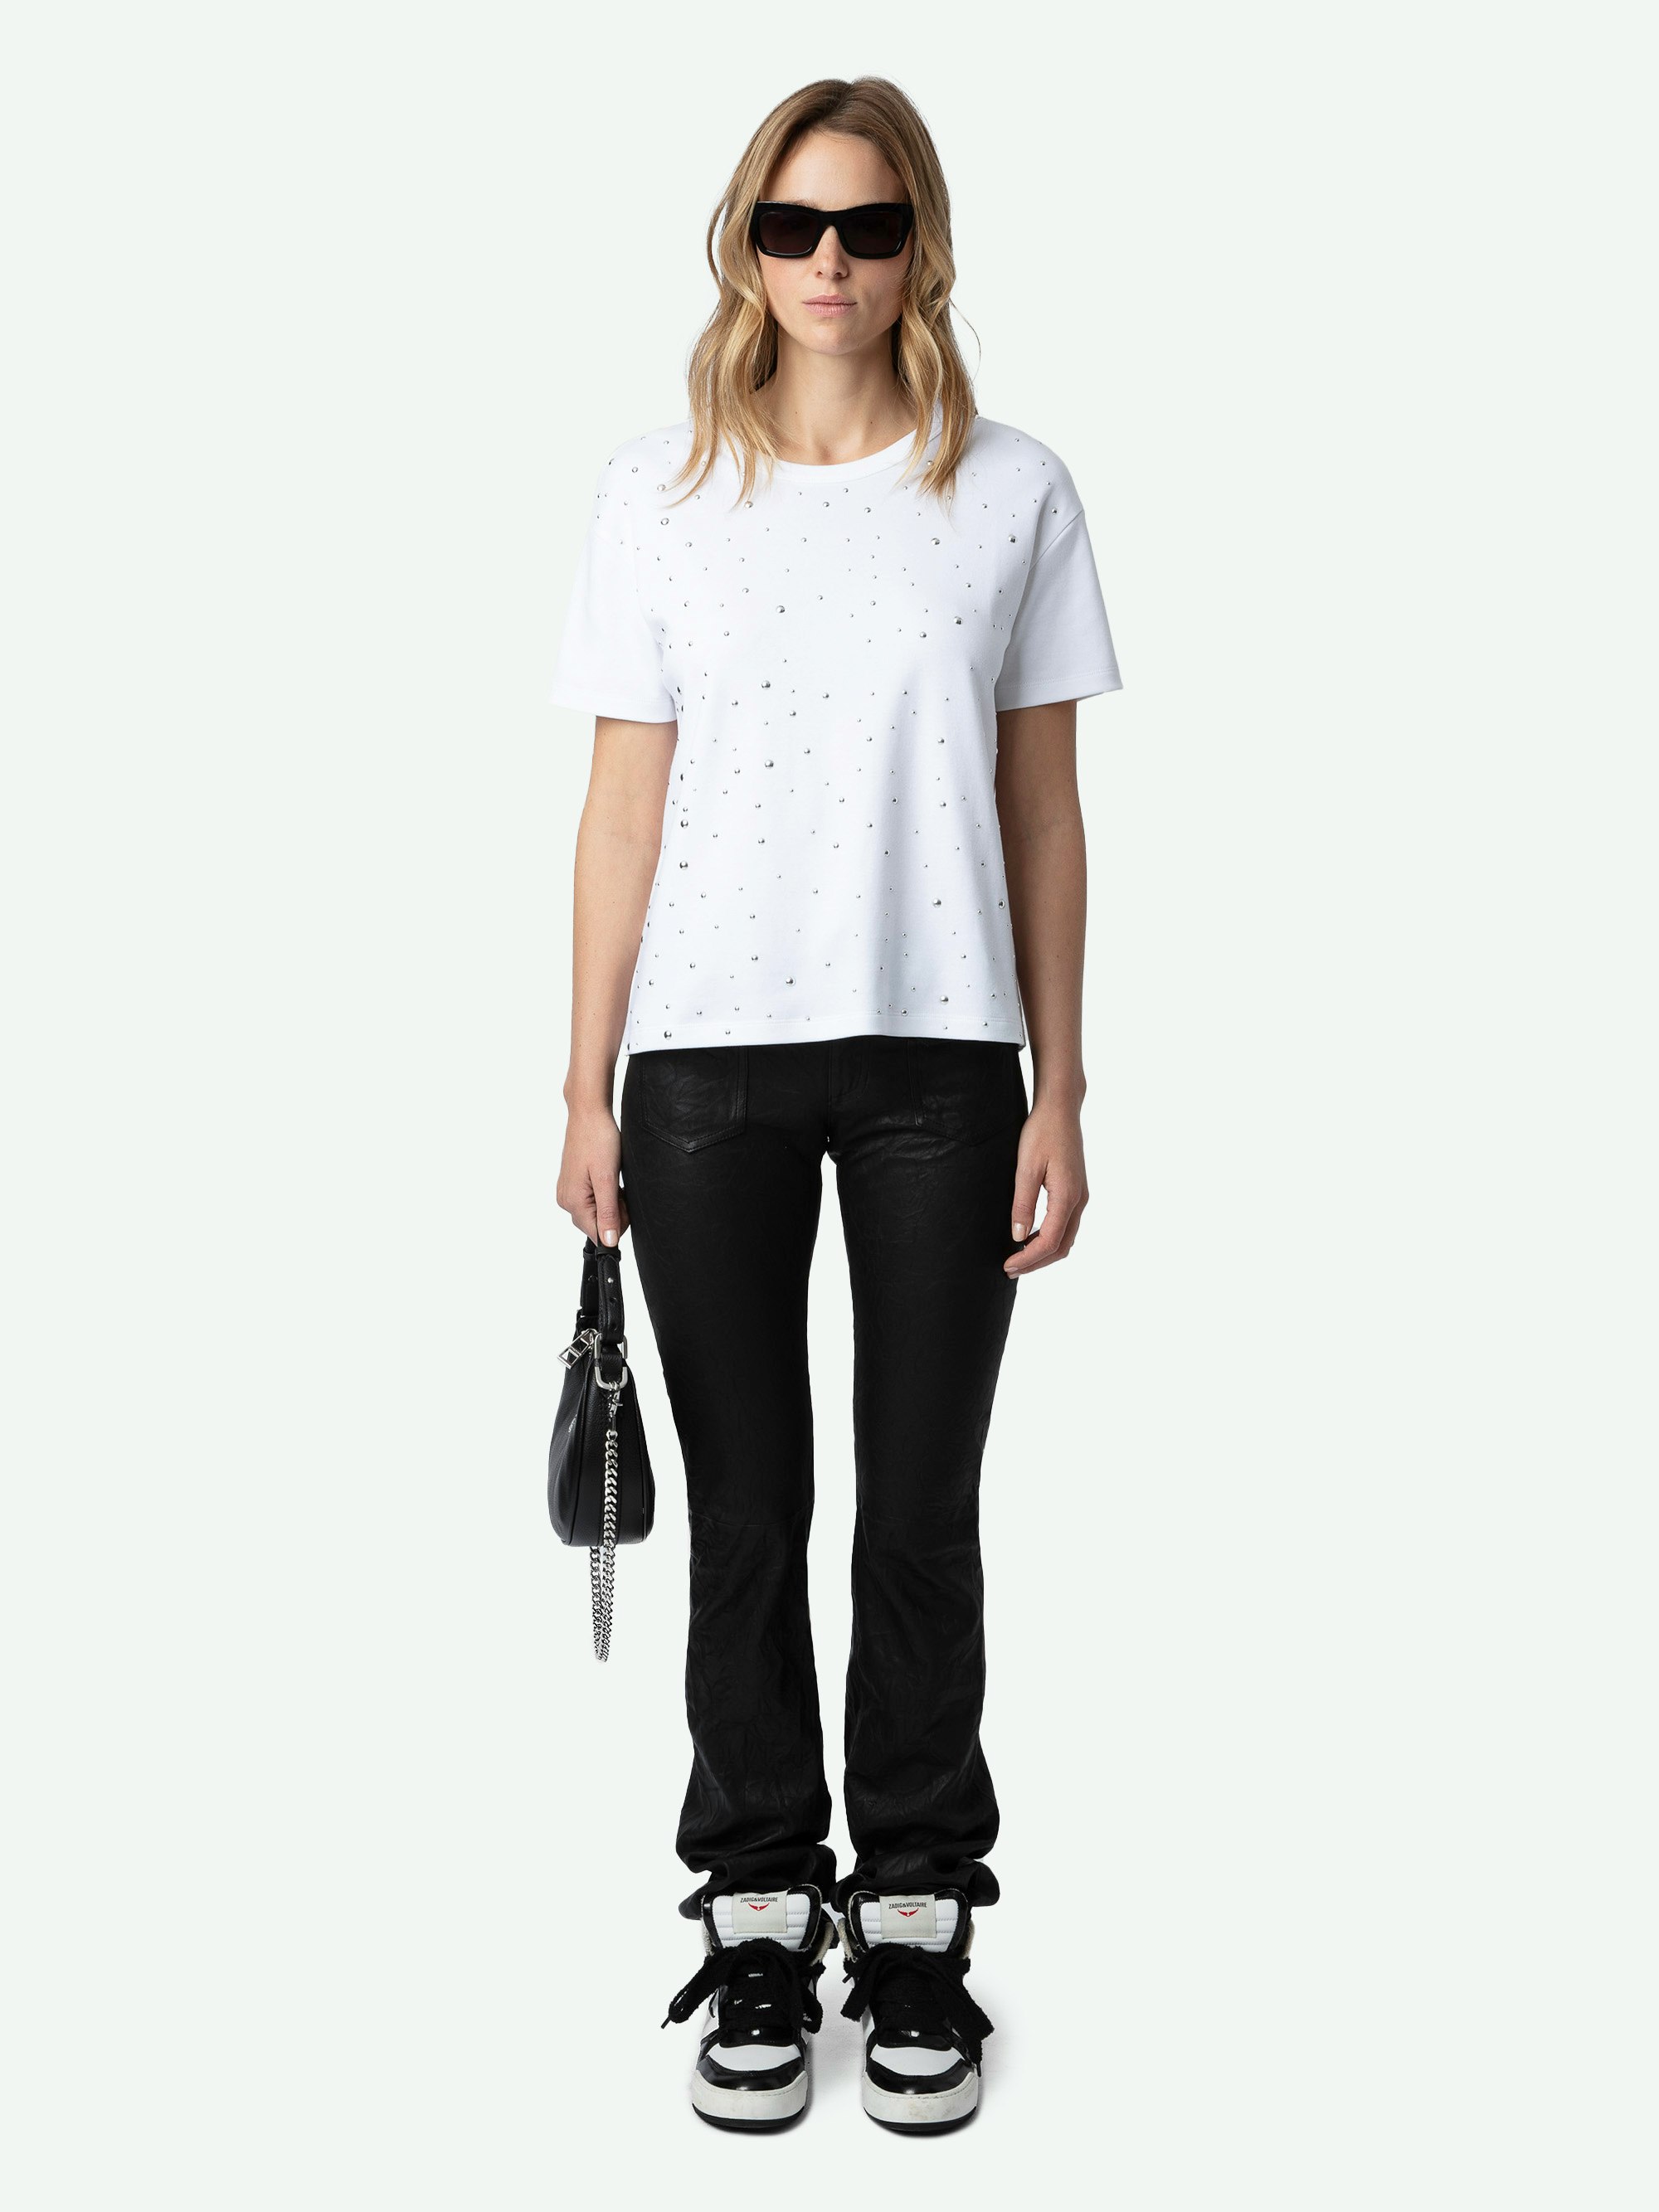 Marta Studded T-shirt - Women's short sleeved t-shirt with silver studs throughout.